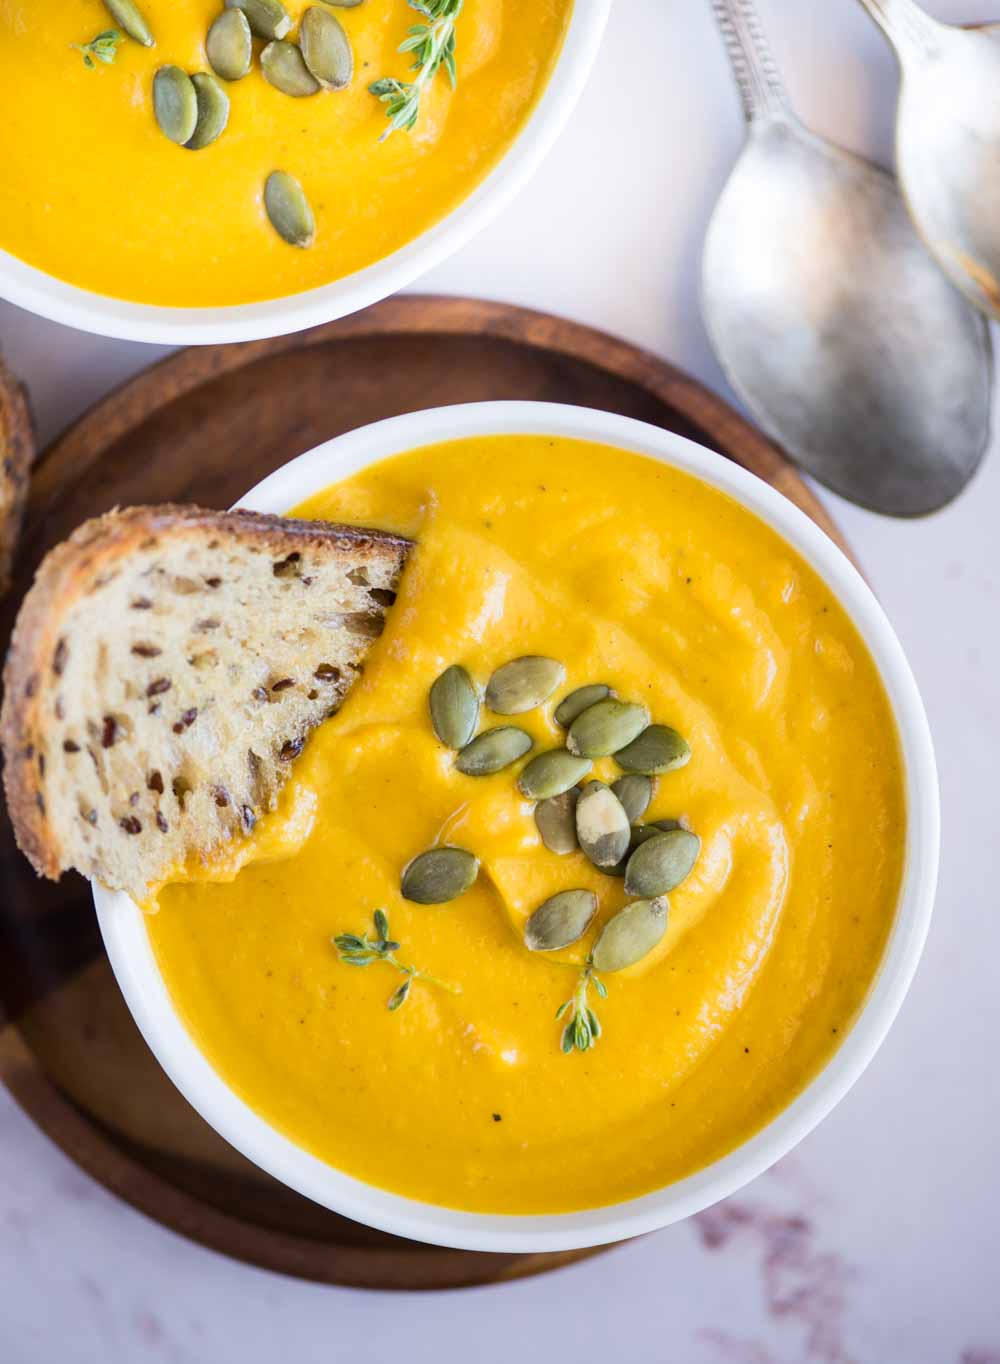 Pumpkin Soup is velvety smooth and creamy without oodles of cream in it. The taste of pumpkin really shines through this healthy soup.